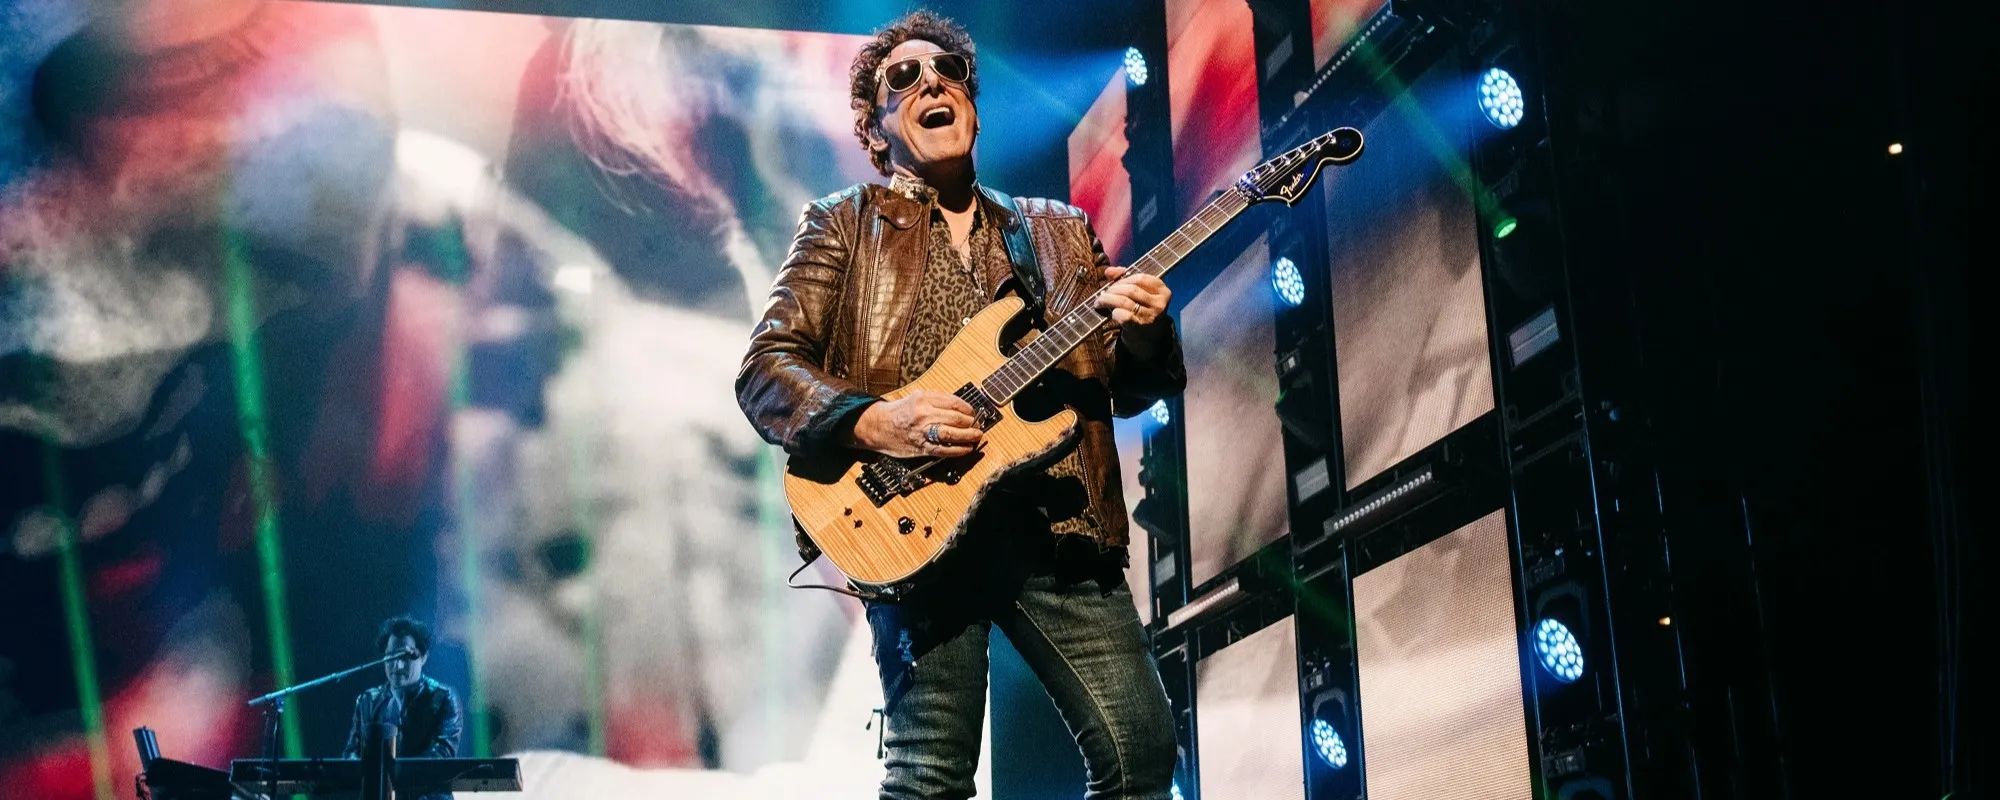 5 Neal Schon Career Highlights Outside of Journey in Honor of His Milestone Birthday